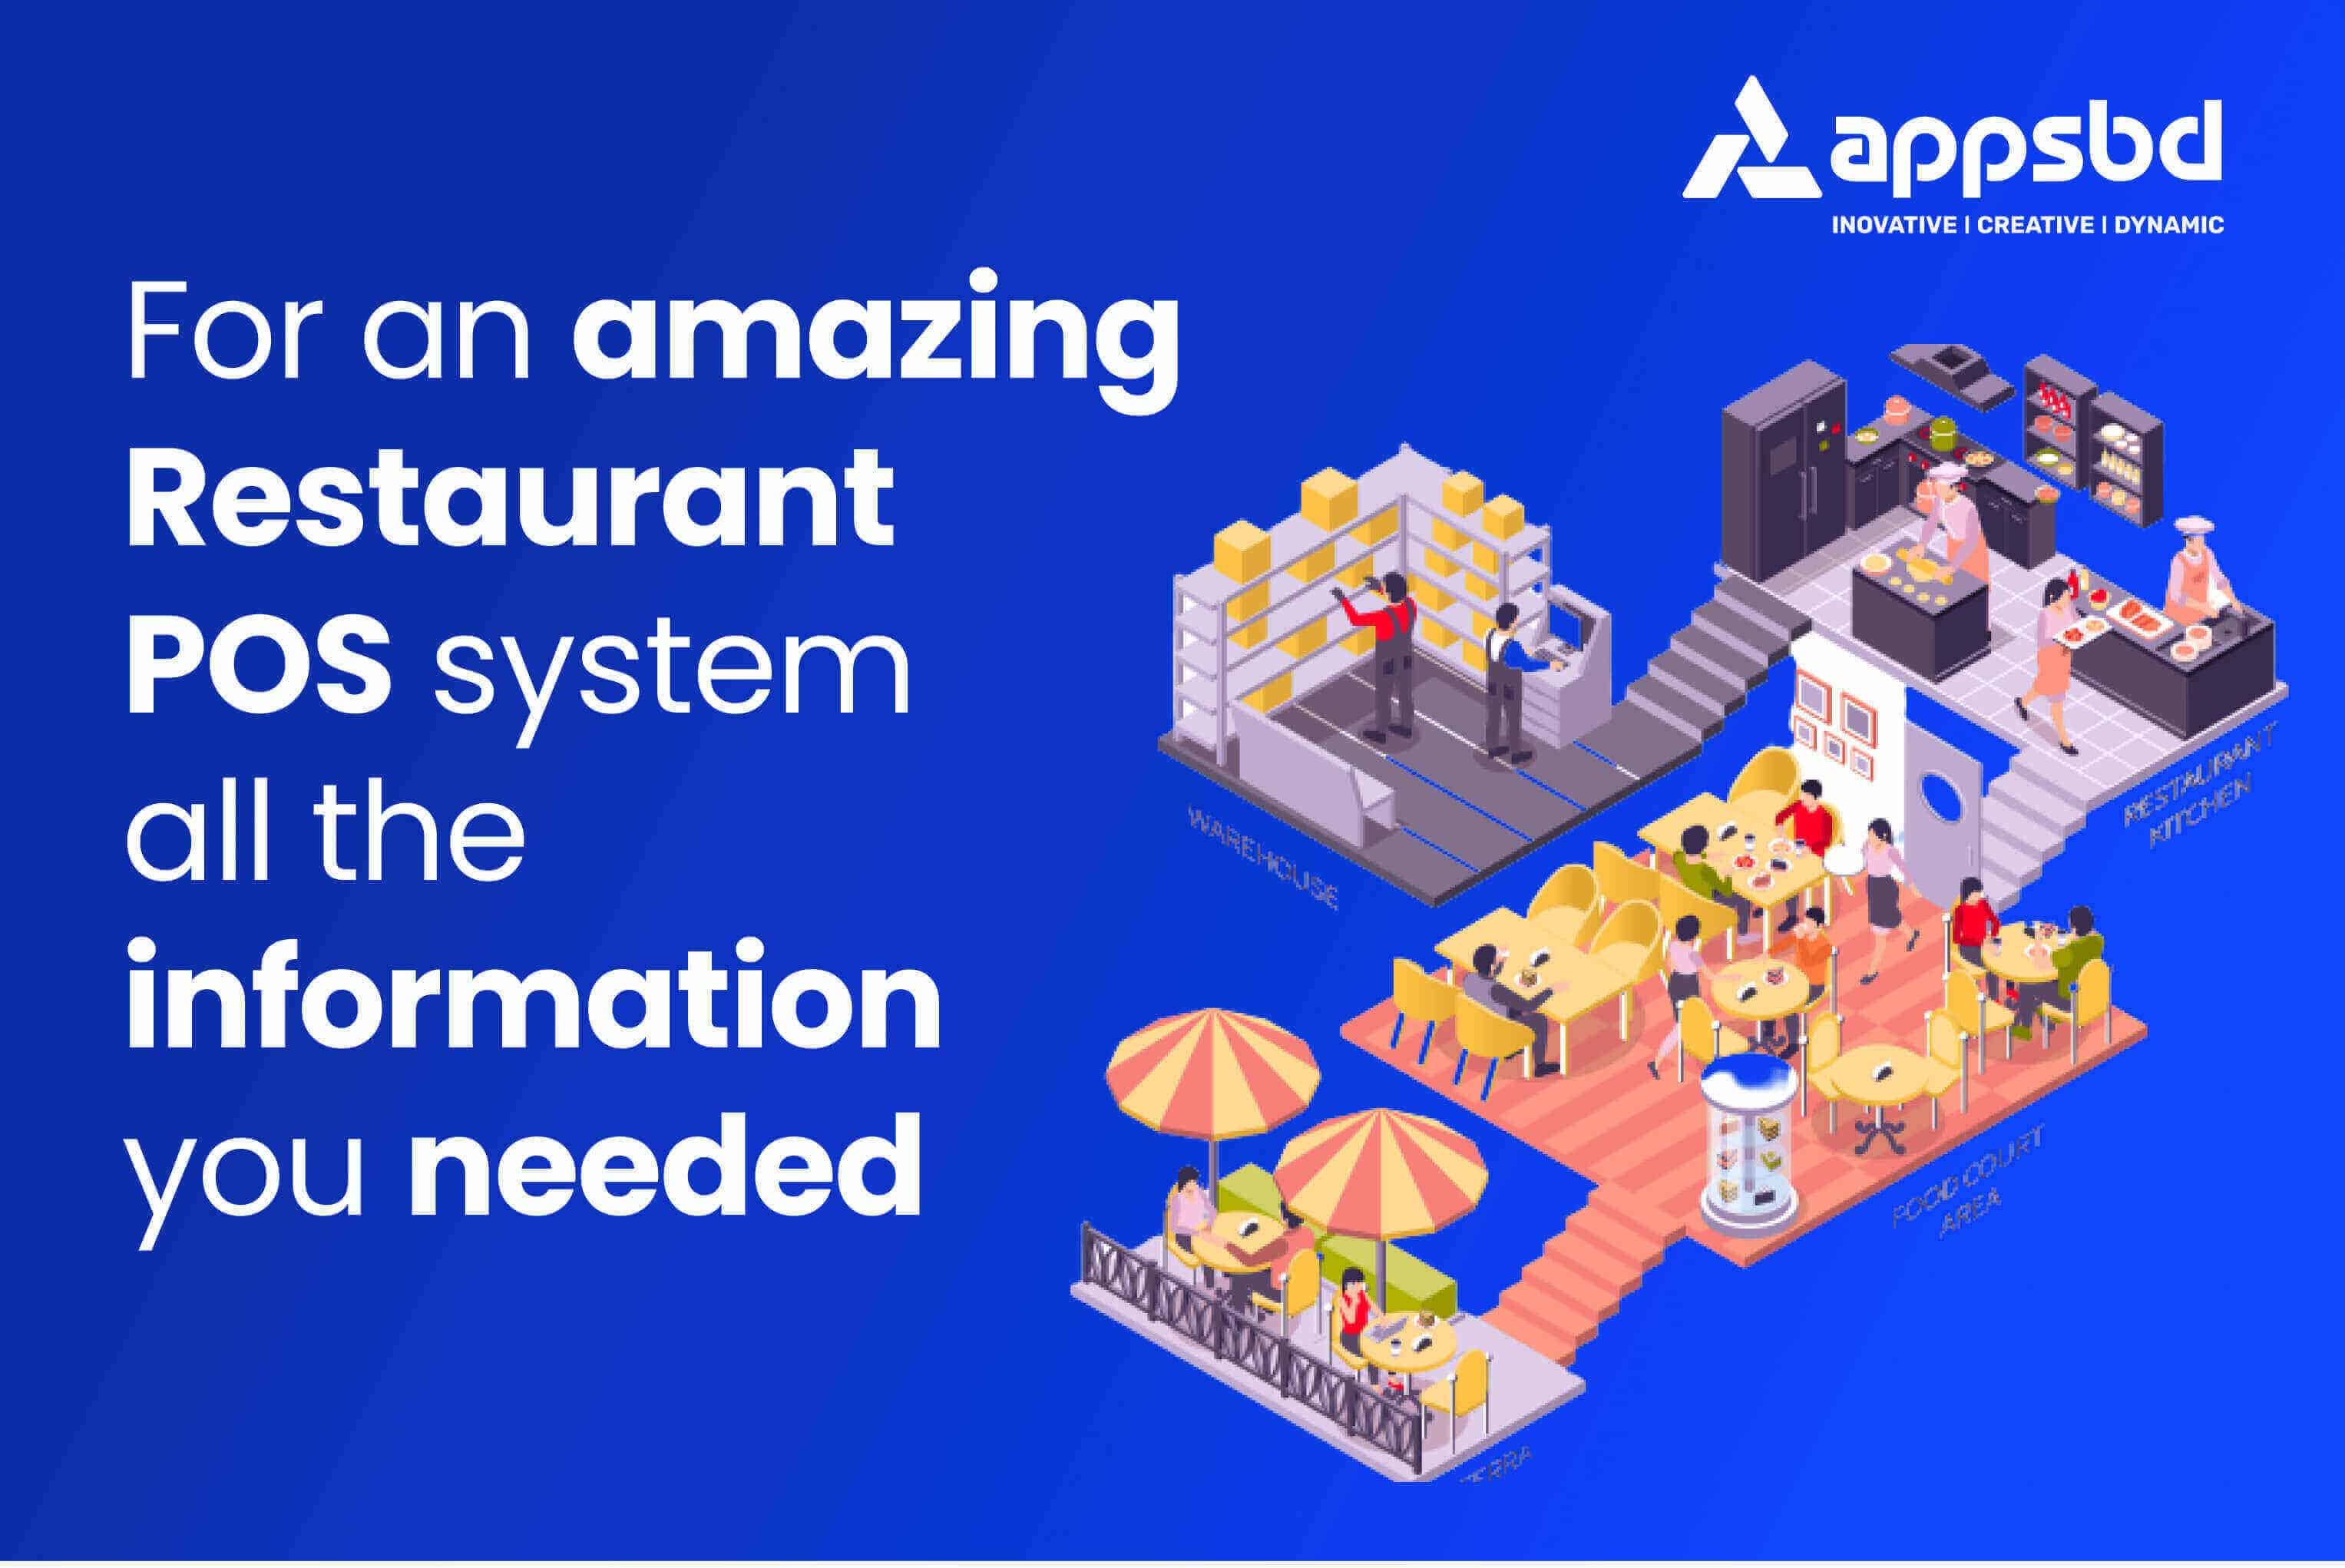 For an amazing Restaurant POS system all the information you needed